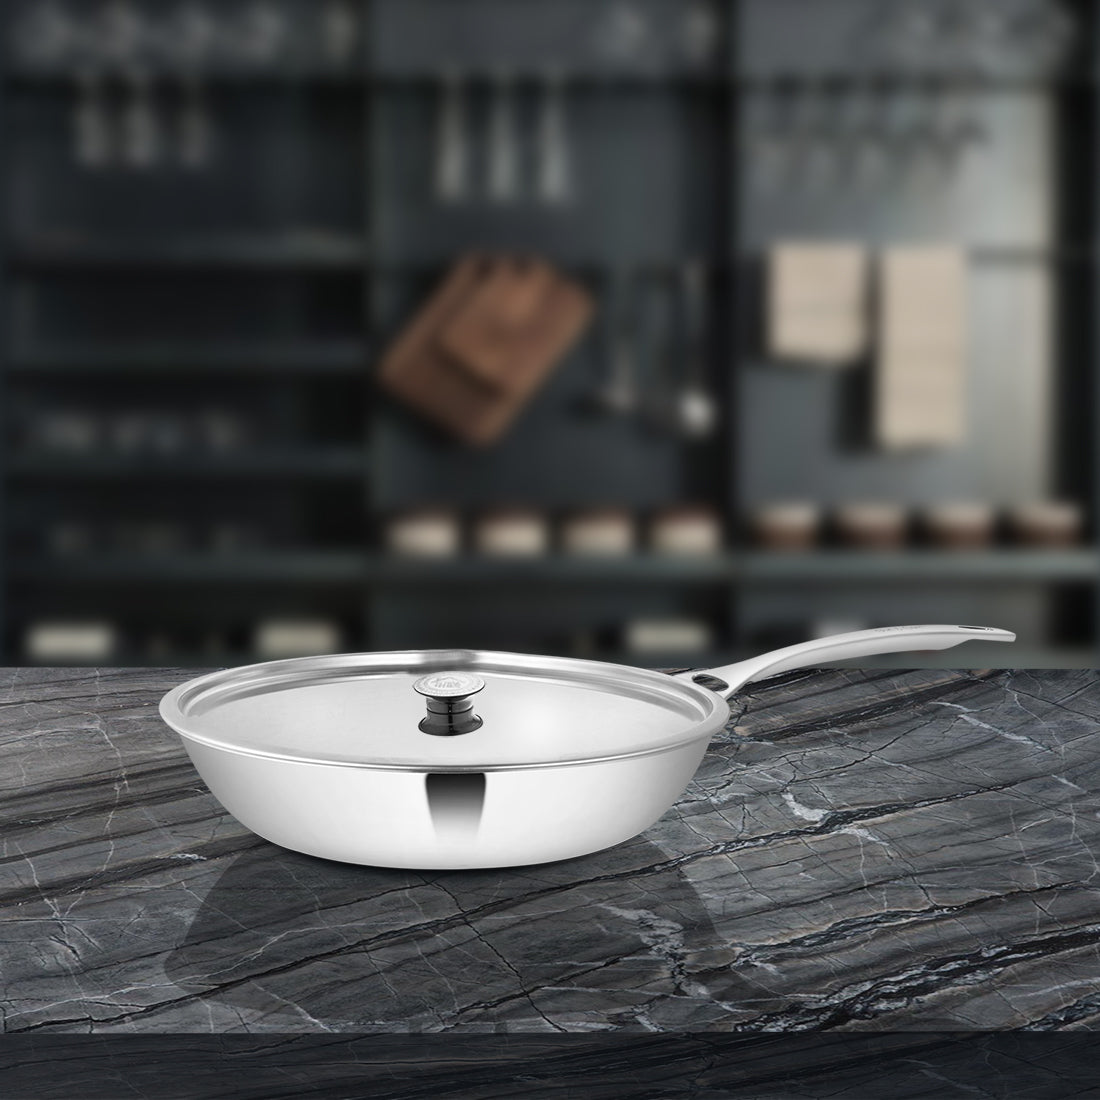 Stainless Steel Heavy Weight Fry Pan with SS Lid Platinum